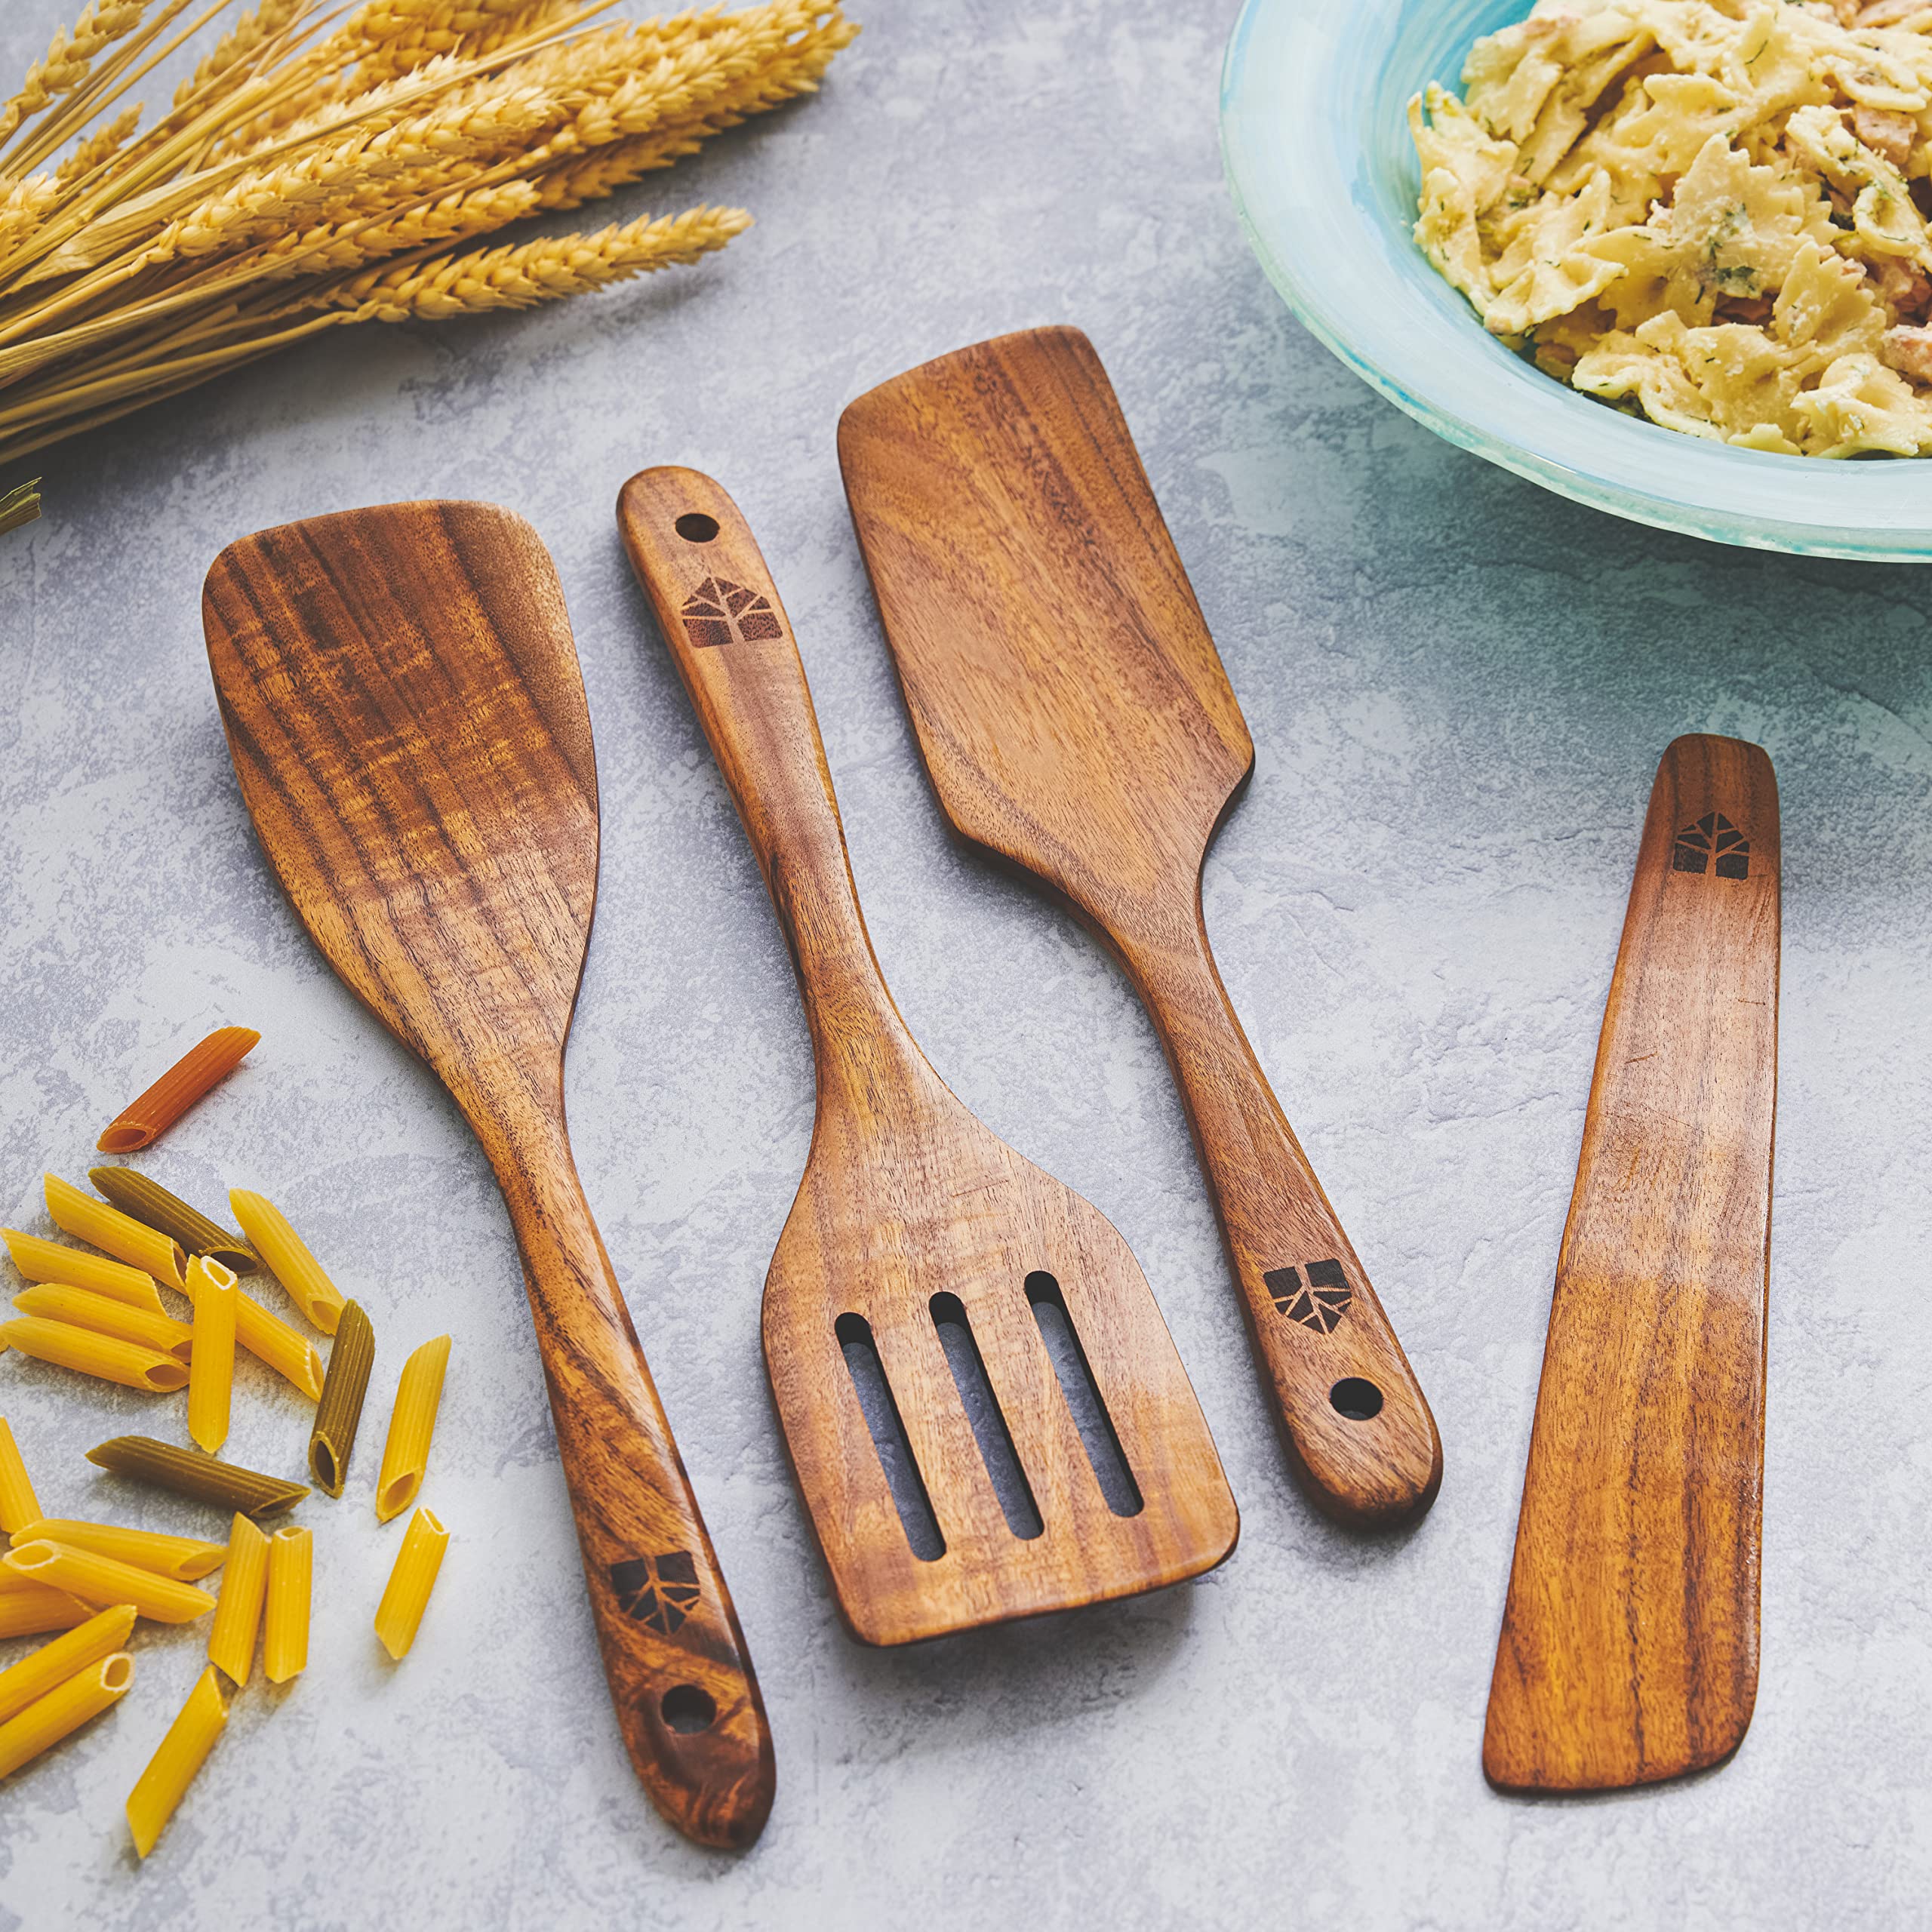 WOODENHOUSE LIFELONG QUALITY Wooden Spatula for cooking, Kitchen Set of 4,  Natural Teak Wooden Utensils including Paddle, Turner Spatula, Slotted